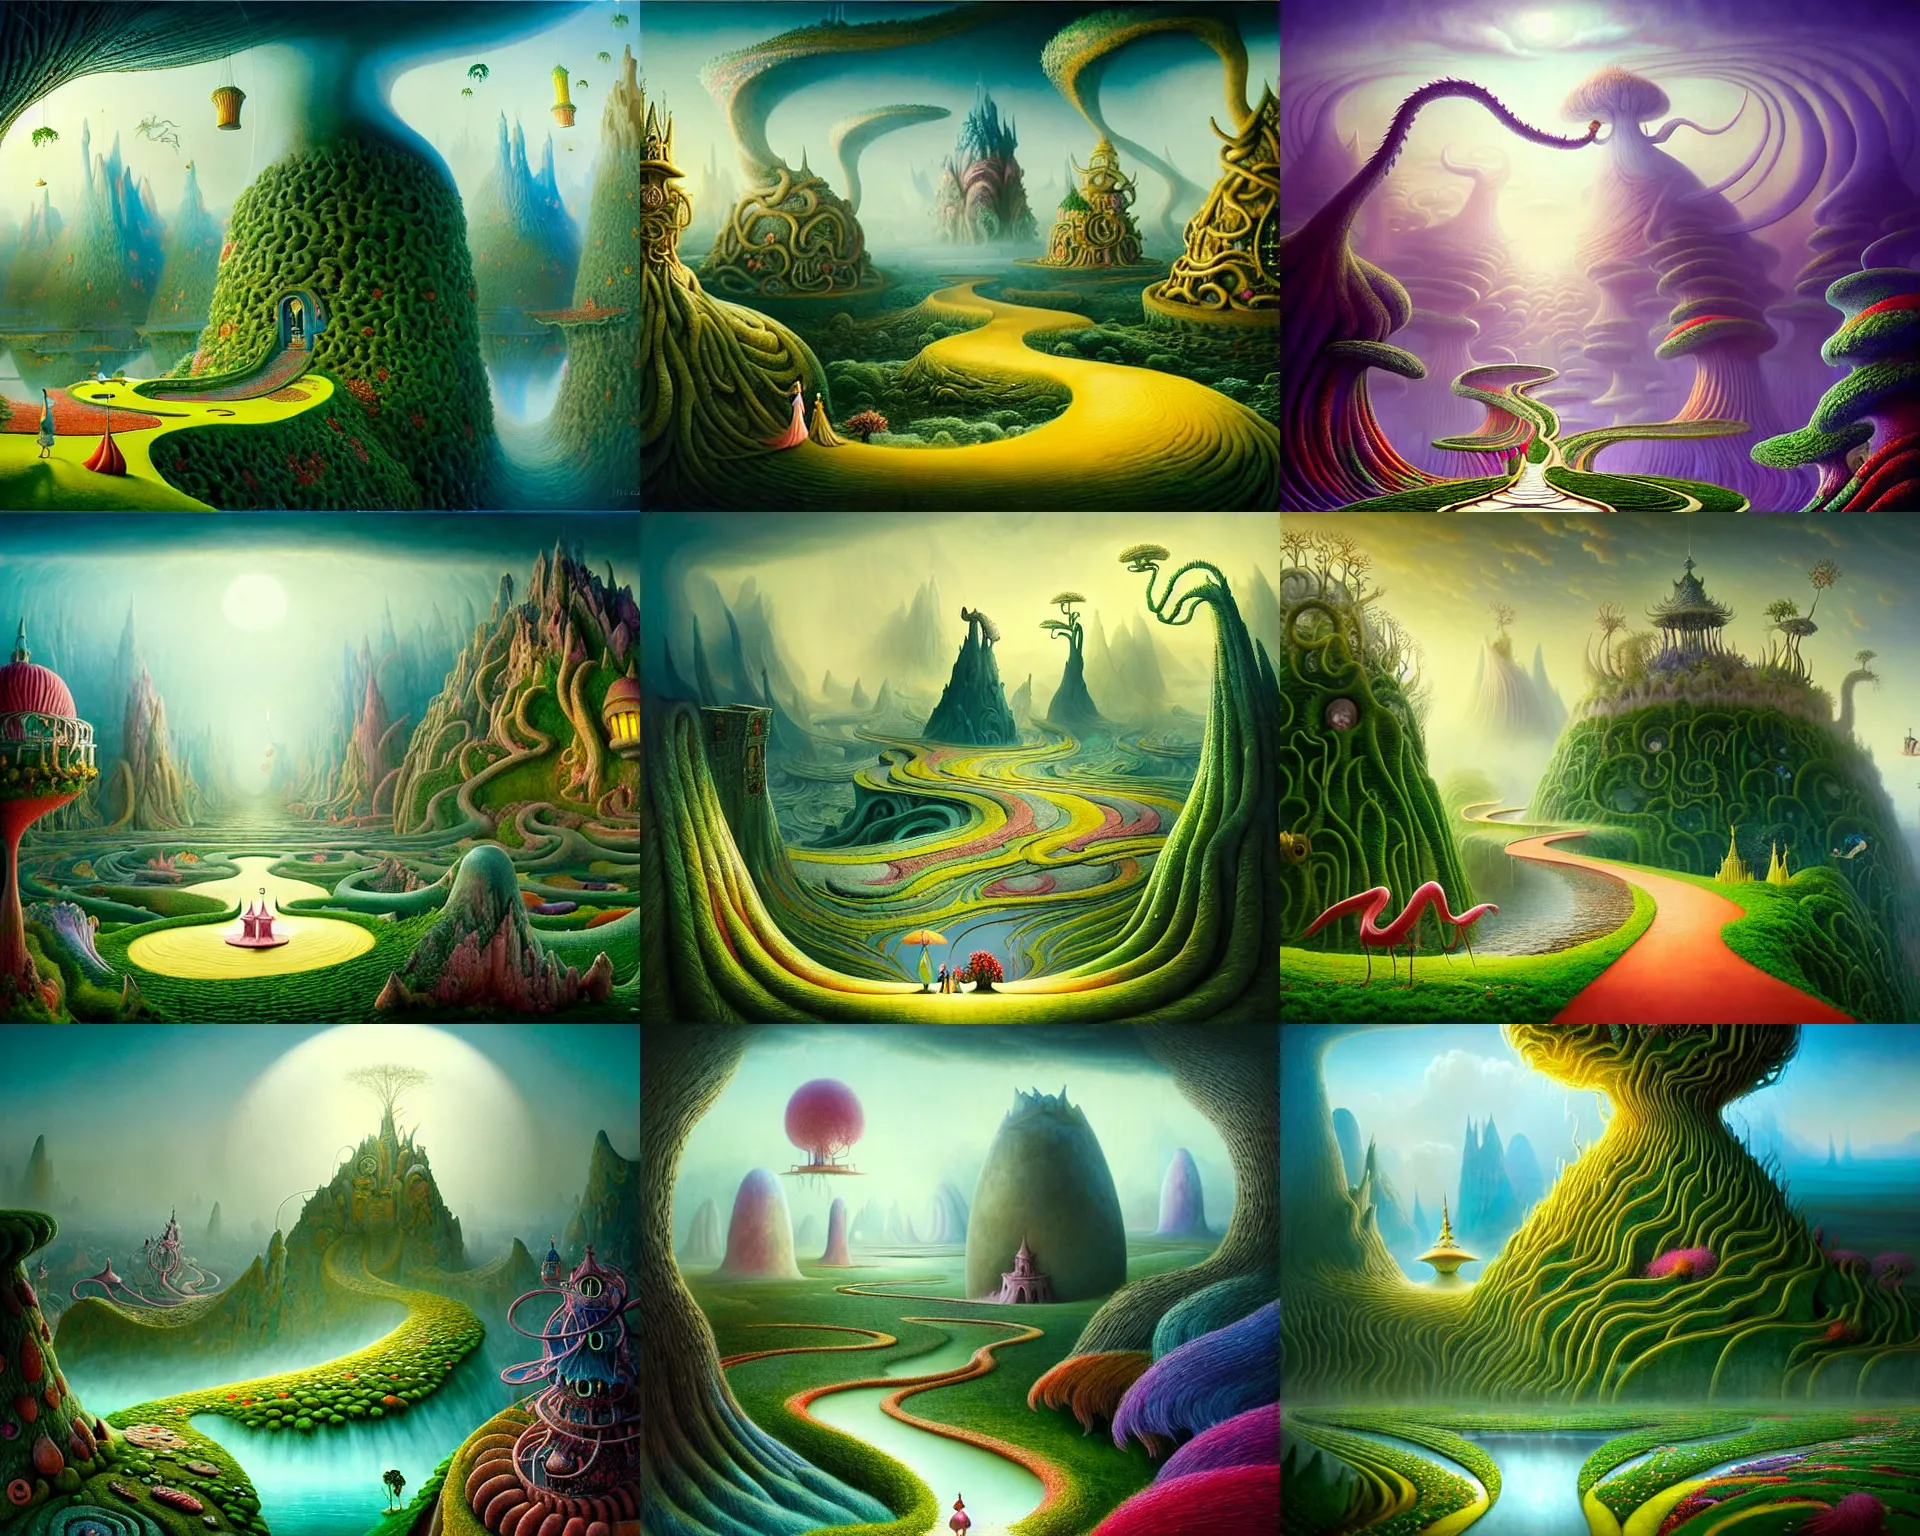 Prompt: a beguiling epic stunning beautiful and insanely detailed matte painting of the impossible winding path into dream worlds with surreal architecture designed by Heironymous Bosch, dream world populated with whimsical seussian creatures, mega structures inspired by Heironymous Bosch's Garden of Earthly Delights, vast surreal landscape and horizon by Cyril Rolando and Oh Ji Hoon, masterpiece!!!, grand!, imaginative!!!, whimsical!! intricate details, sense of awe, elite, wonder, insanely complex, masterful composition!!!, sharp focus, fantasy realism, dramatic lighting